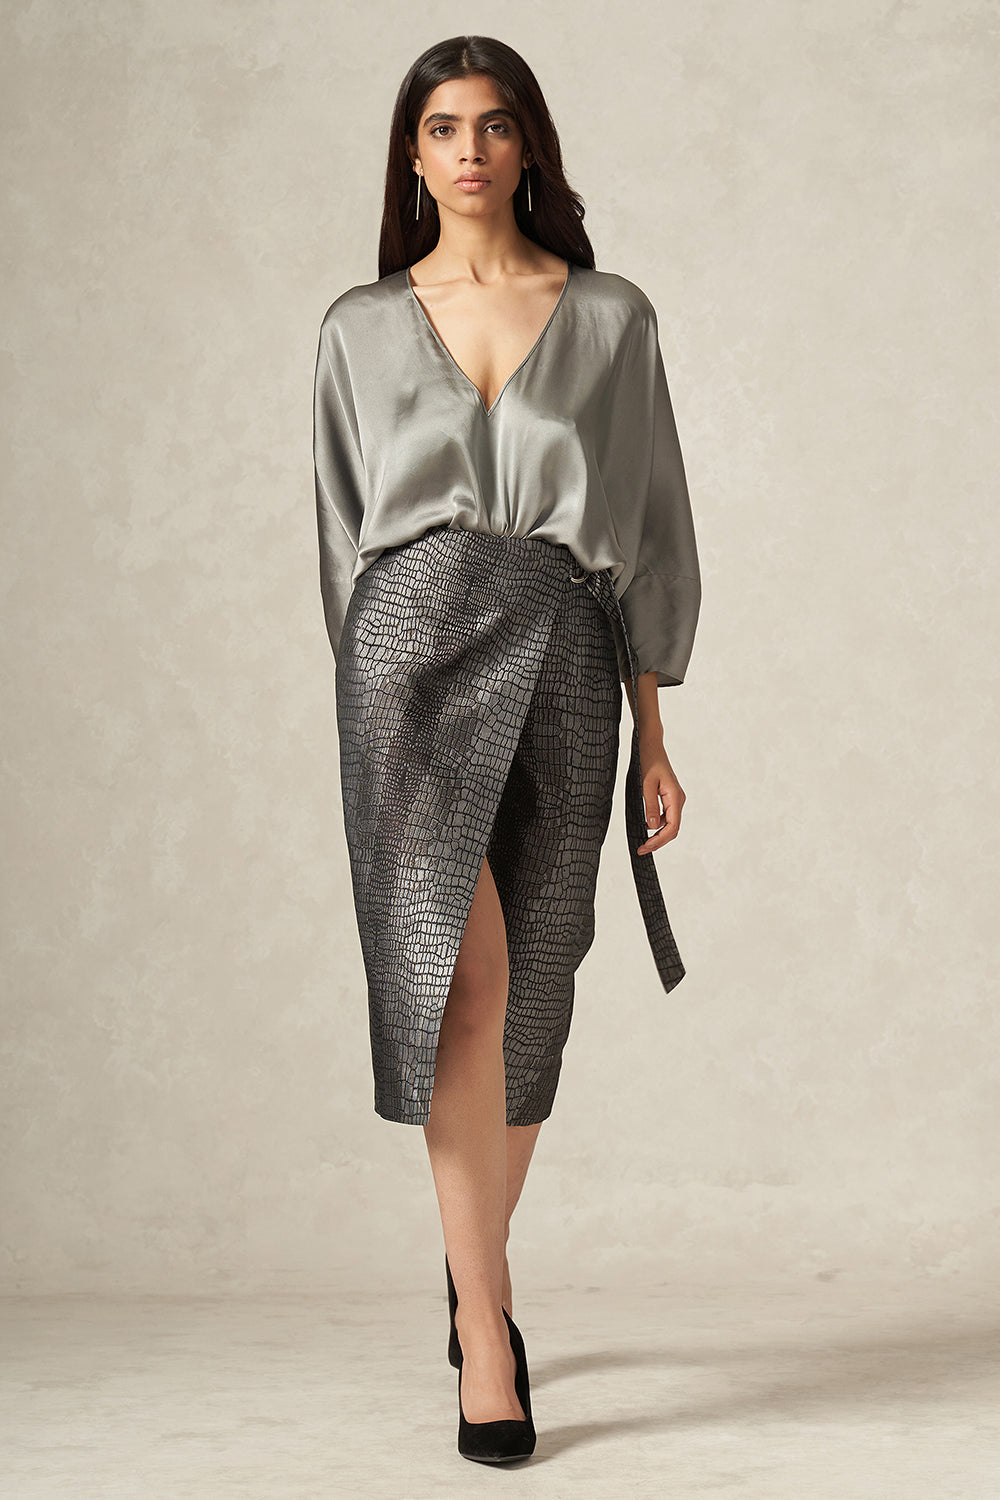 Grey Handwoven Pure Satin Silk Wrap Skirt with Crocodile Weave and Side Buckle Tie-up